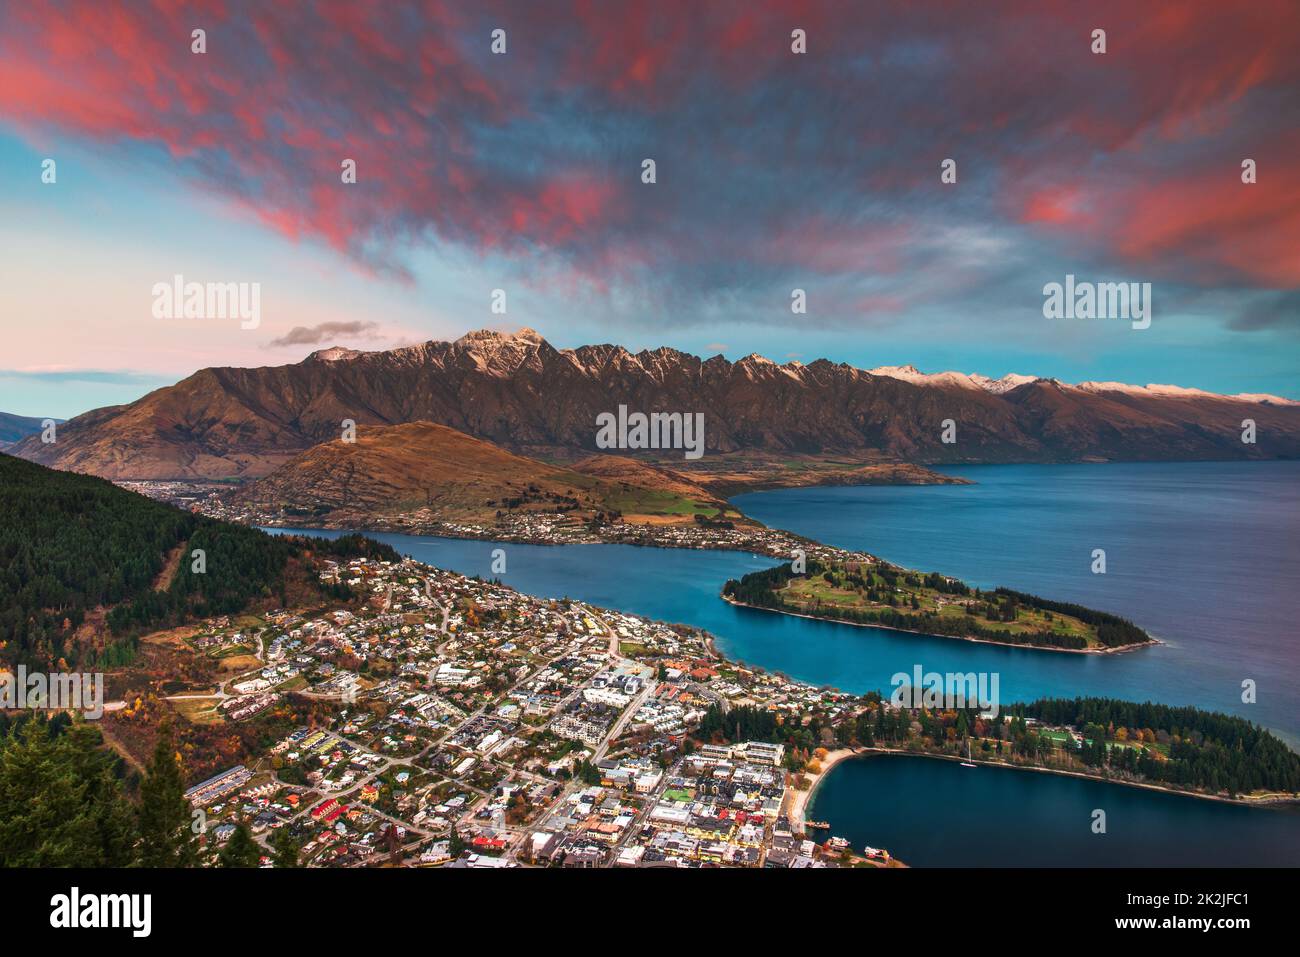 A view over Queenstown taken after sunset from the summit of Ben Lomond Mountain. Queenstown, Otago, New Zealand. Stock Photo